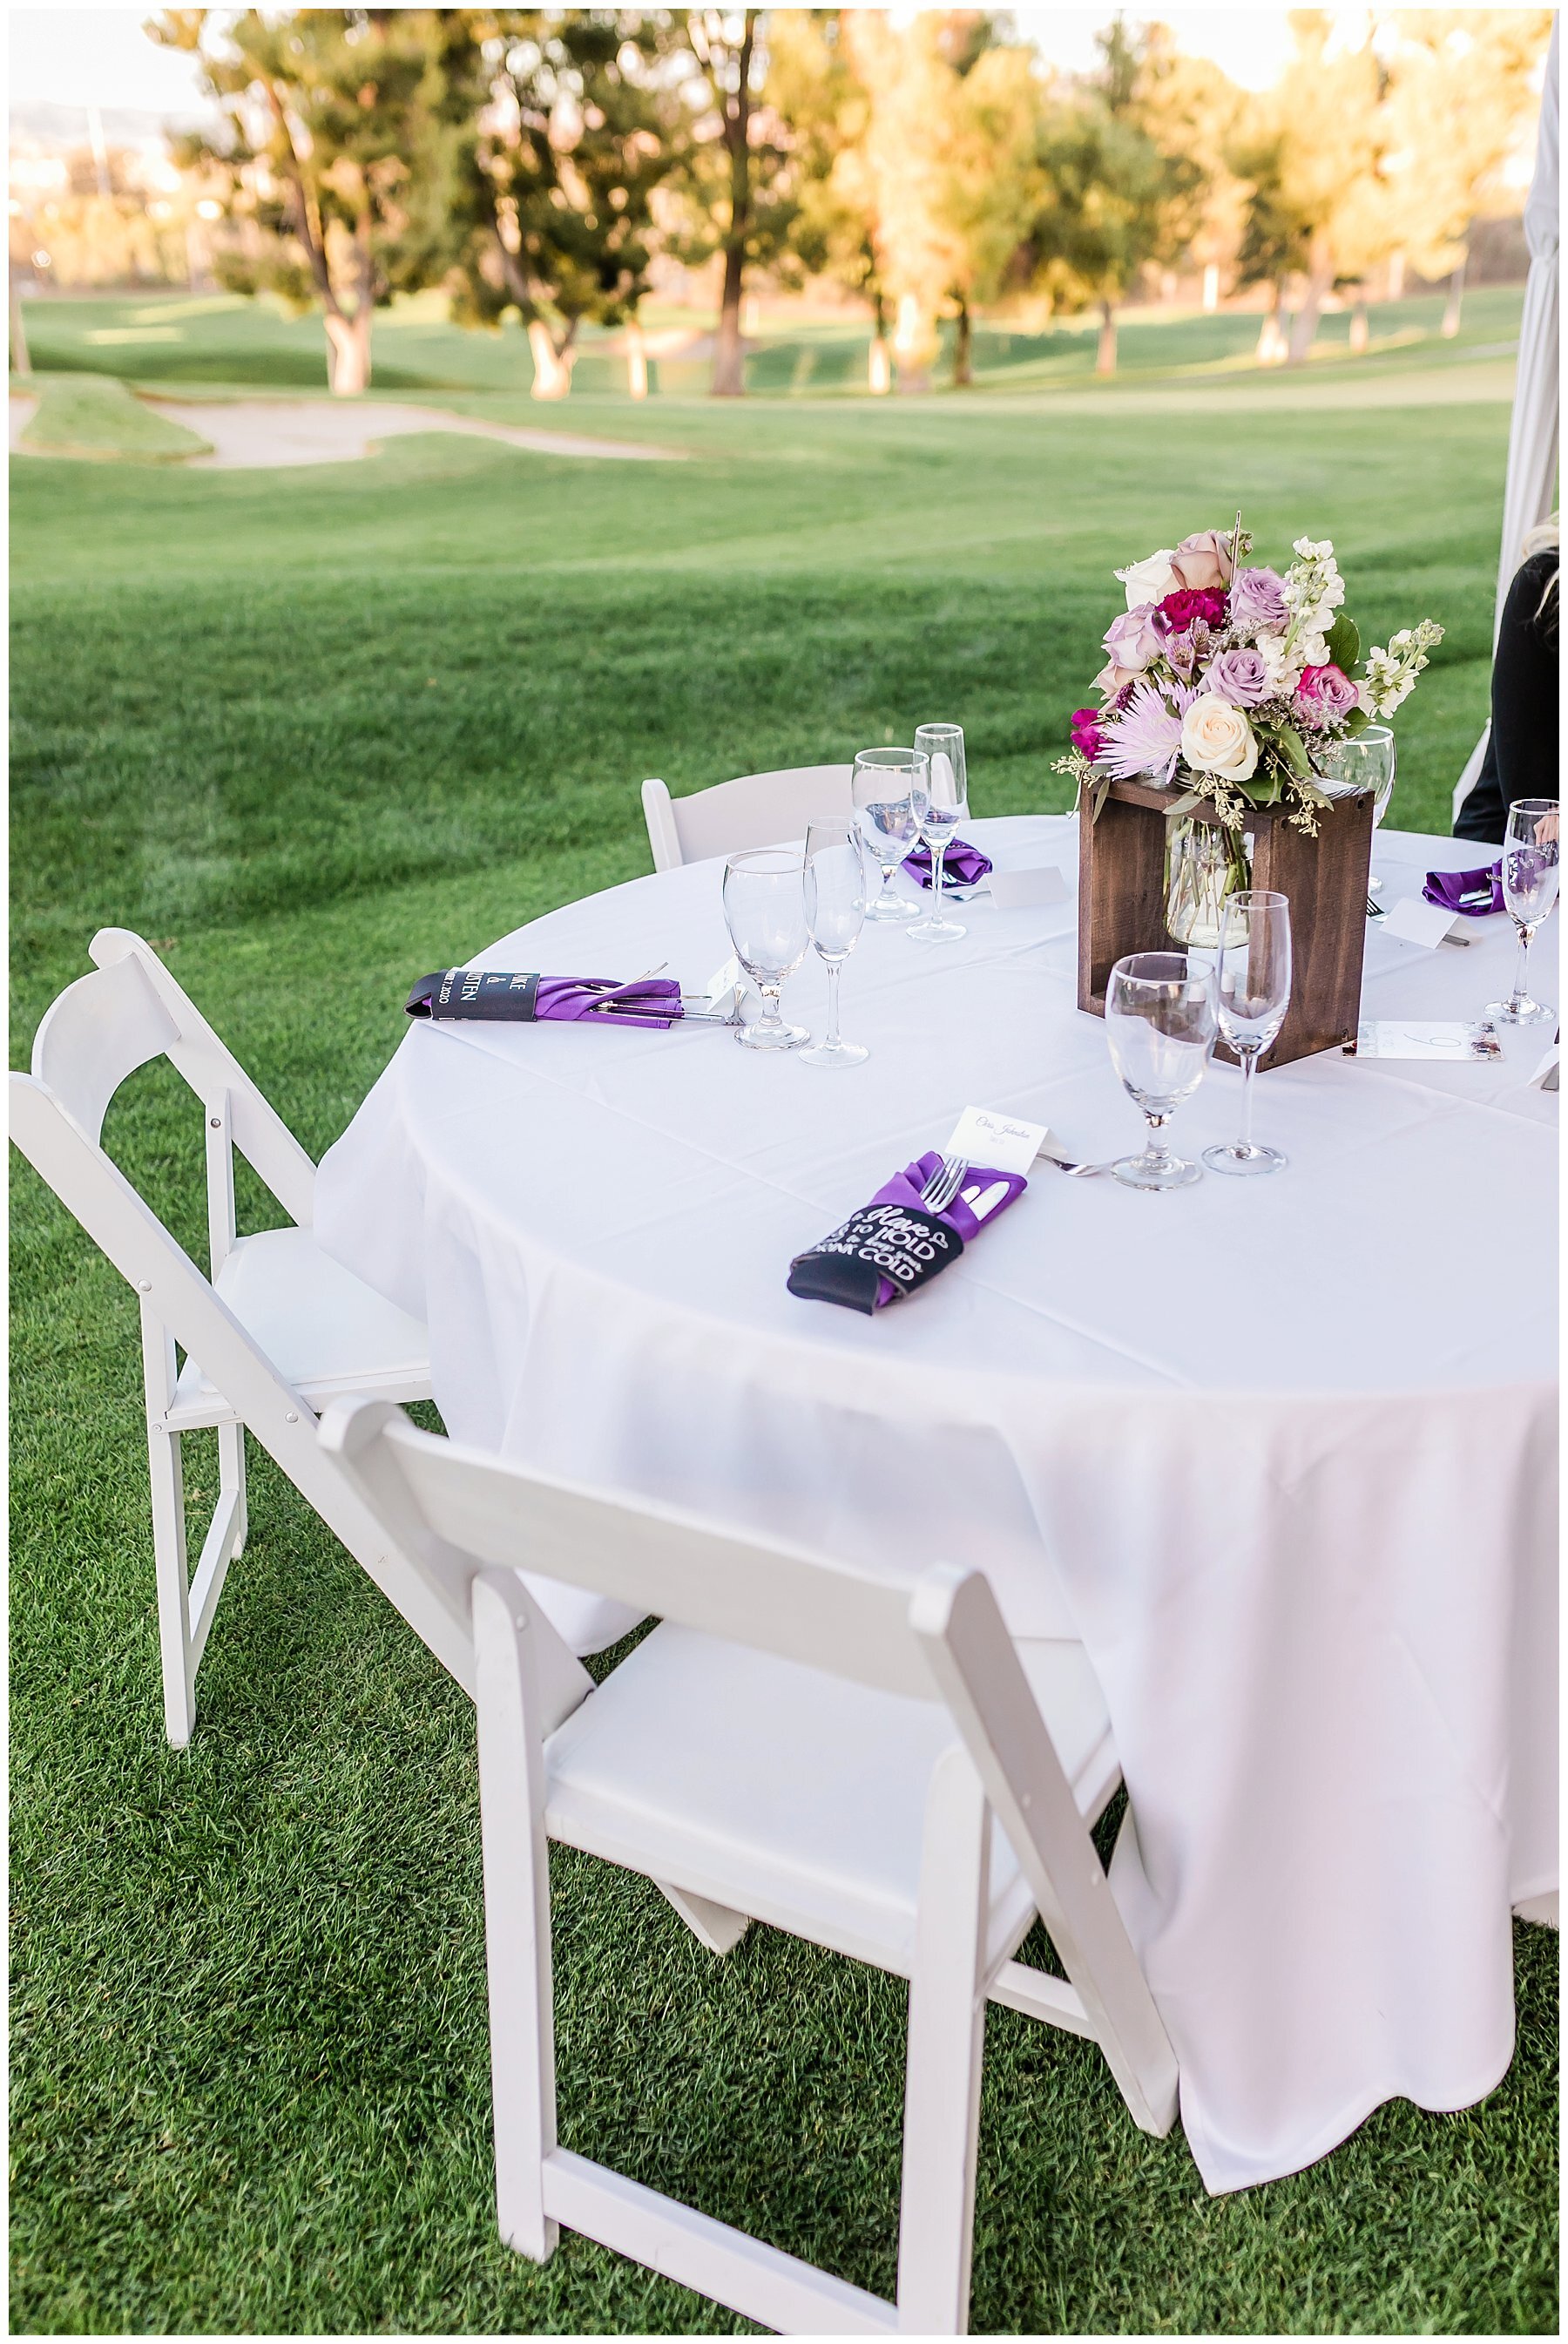  guest seating for the wedding 